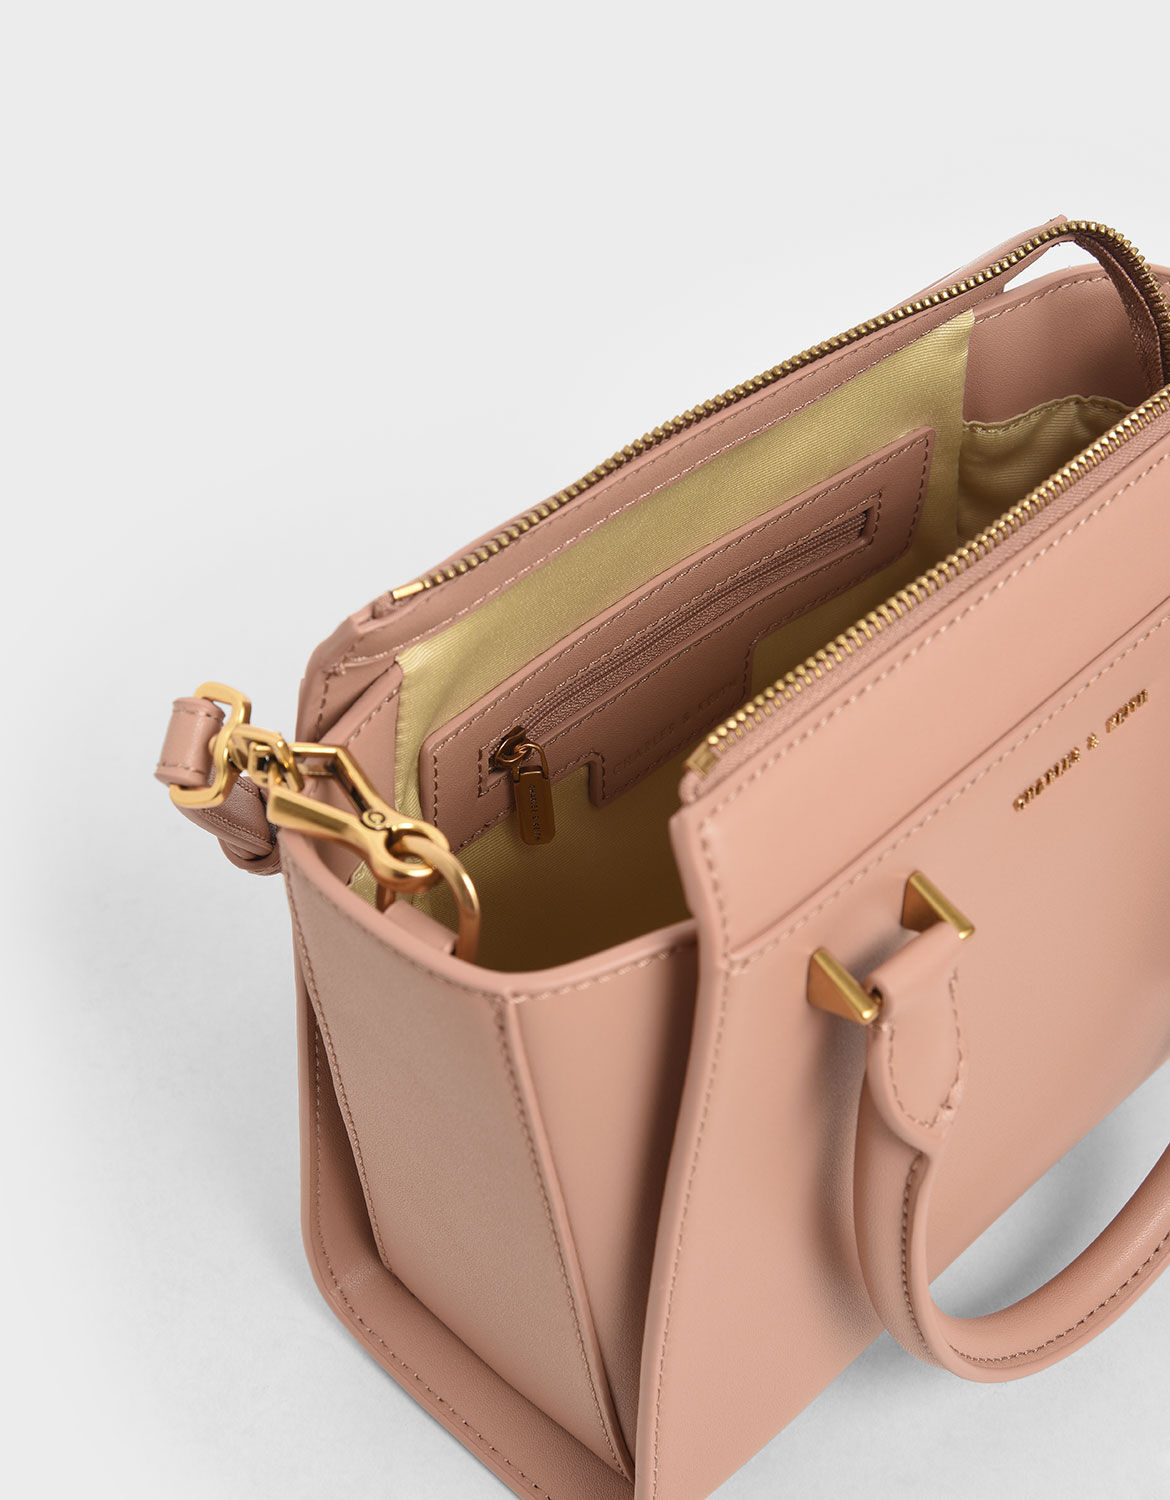 Blush Structured Trapeze Bag  CHARLES  KEITH  EU